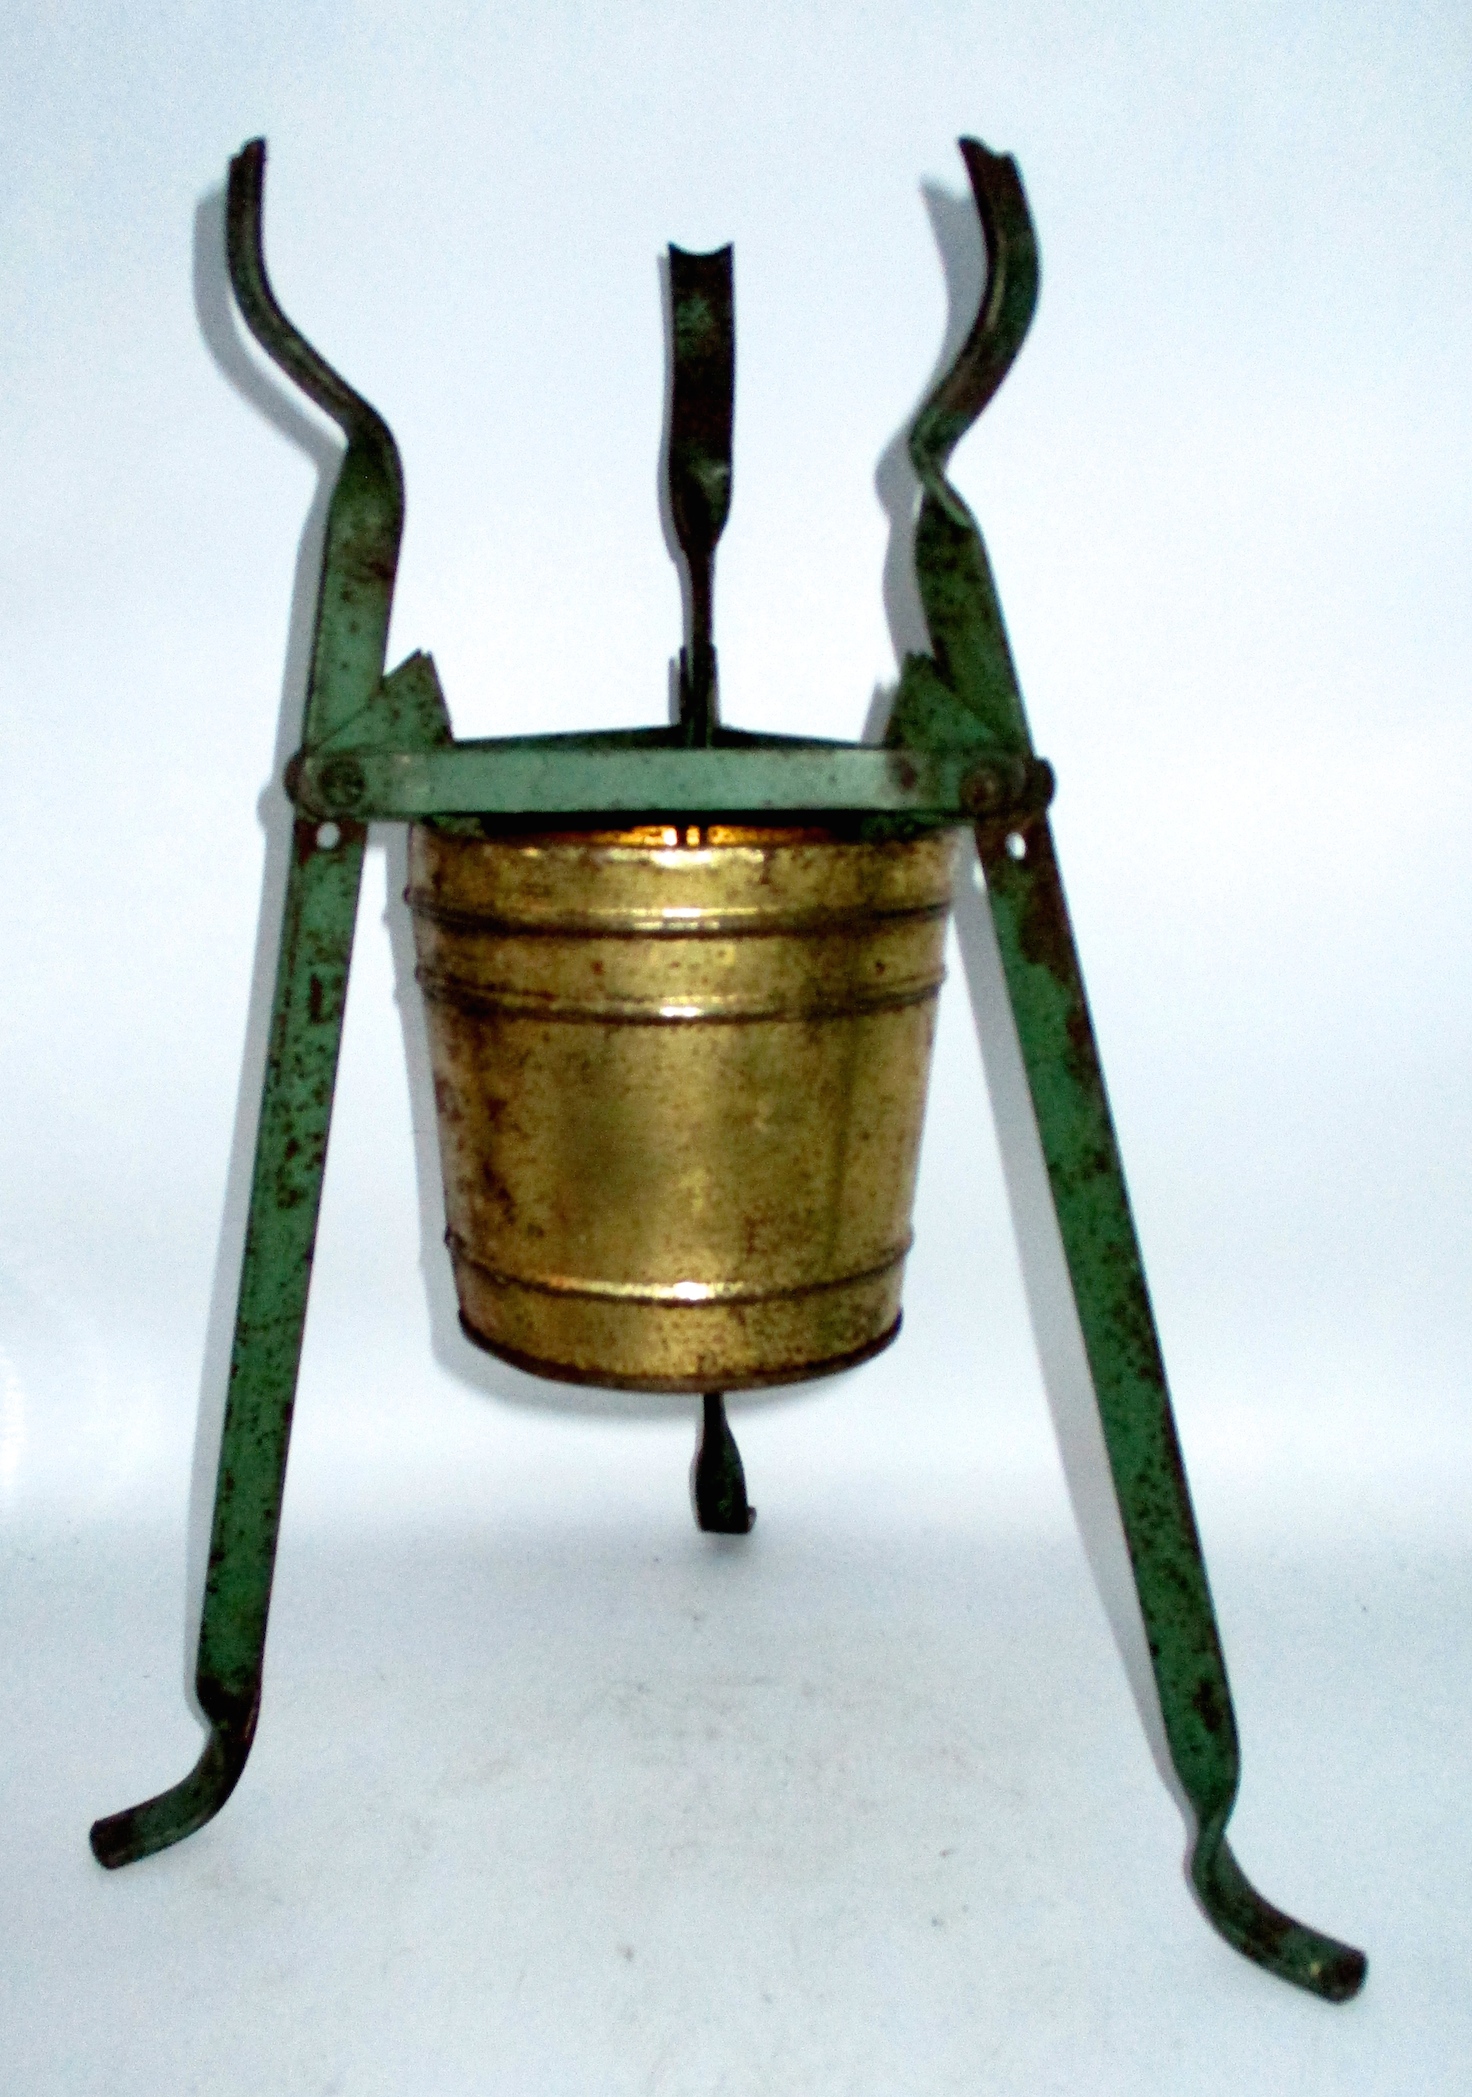 Strap Iron & Sheet Metal Christmas Tree Stand w/Adjustable Legs - (Paper Label - Twin City Iron & Wire Co. Pat. Pend.) Nominal Height 12"